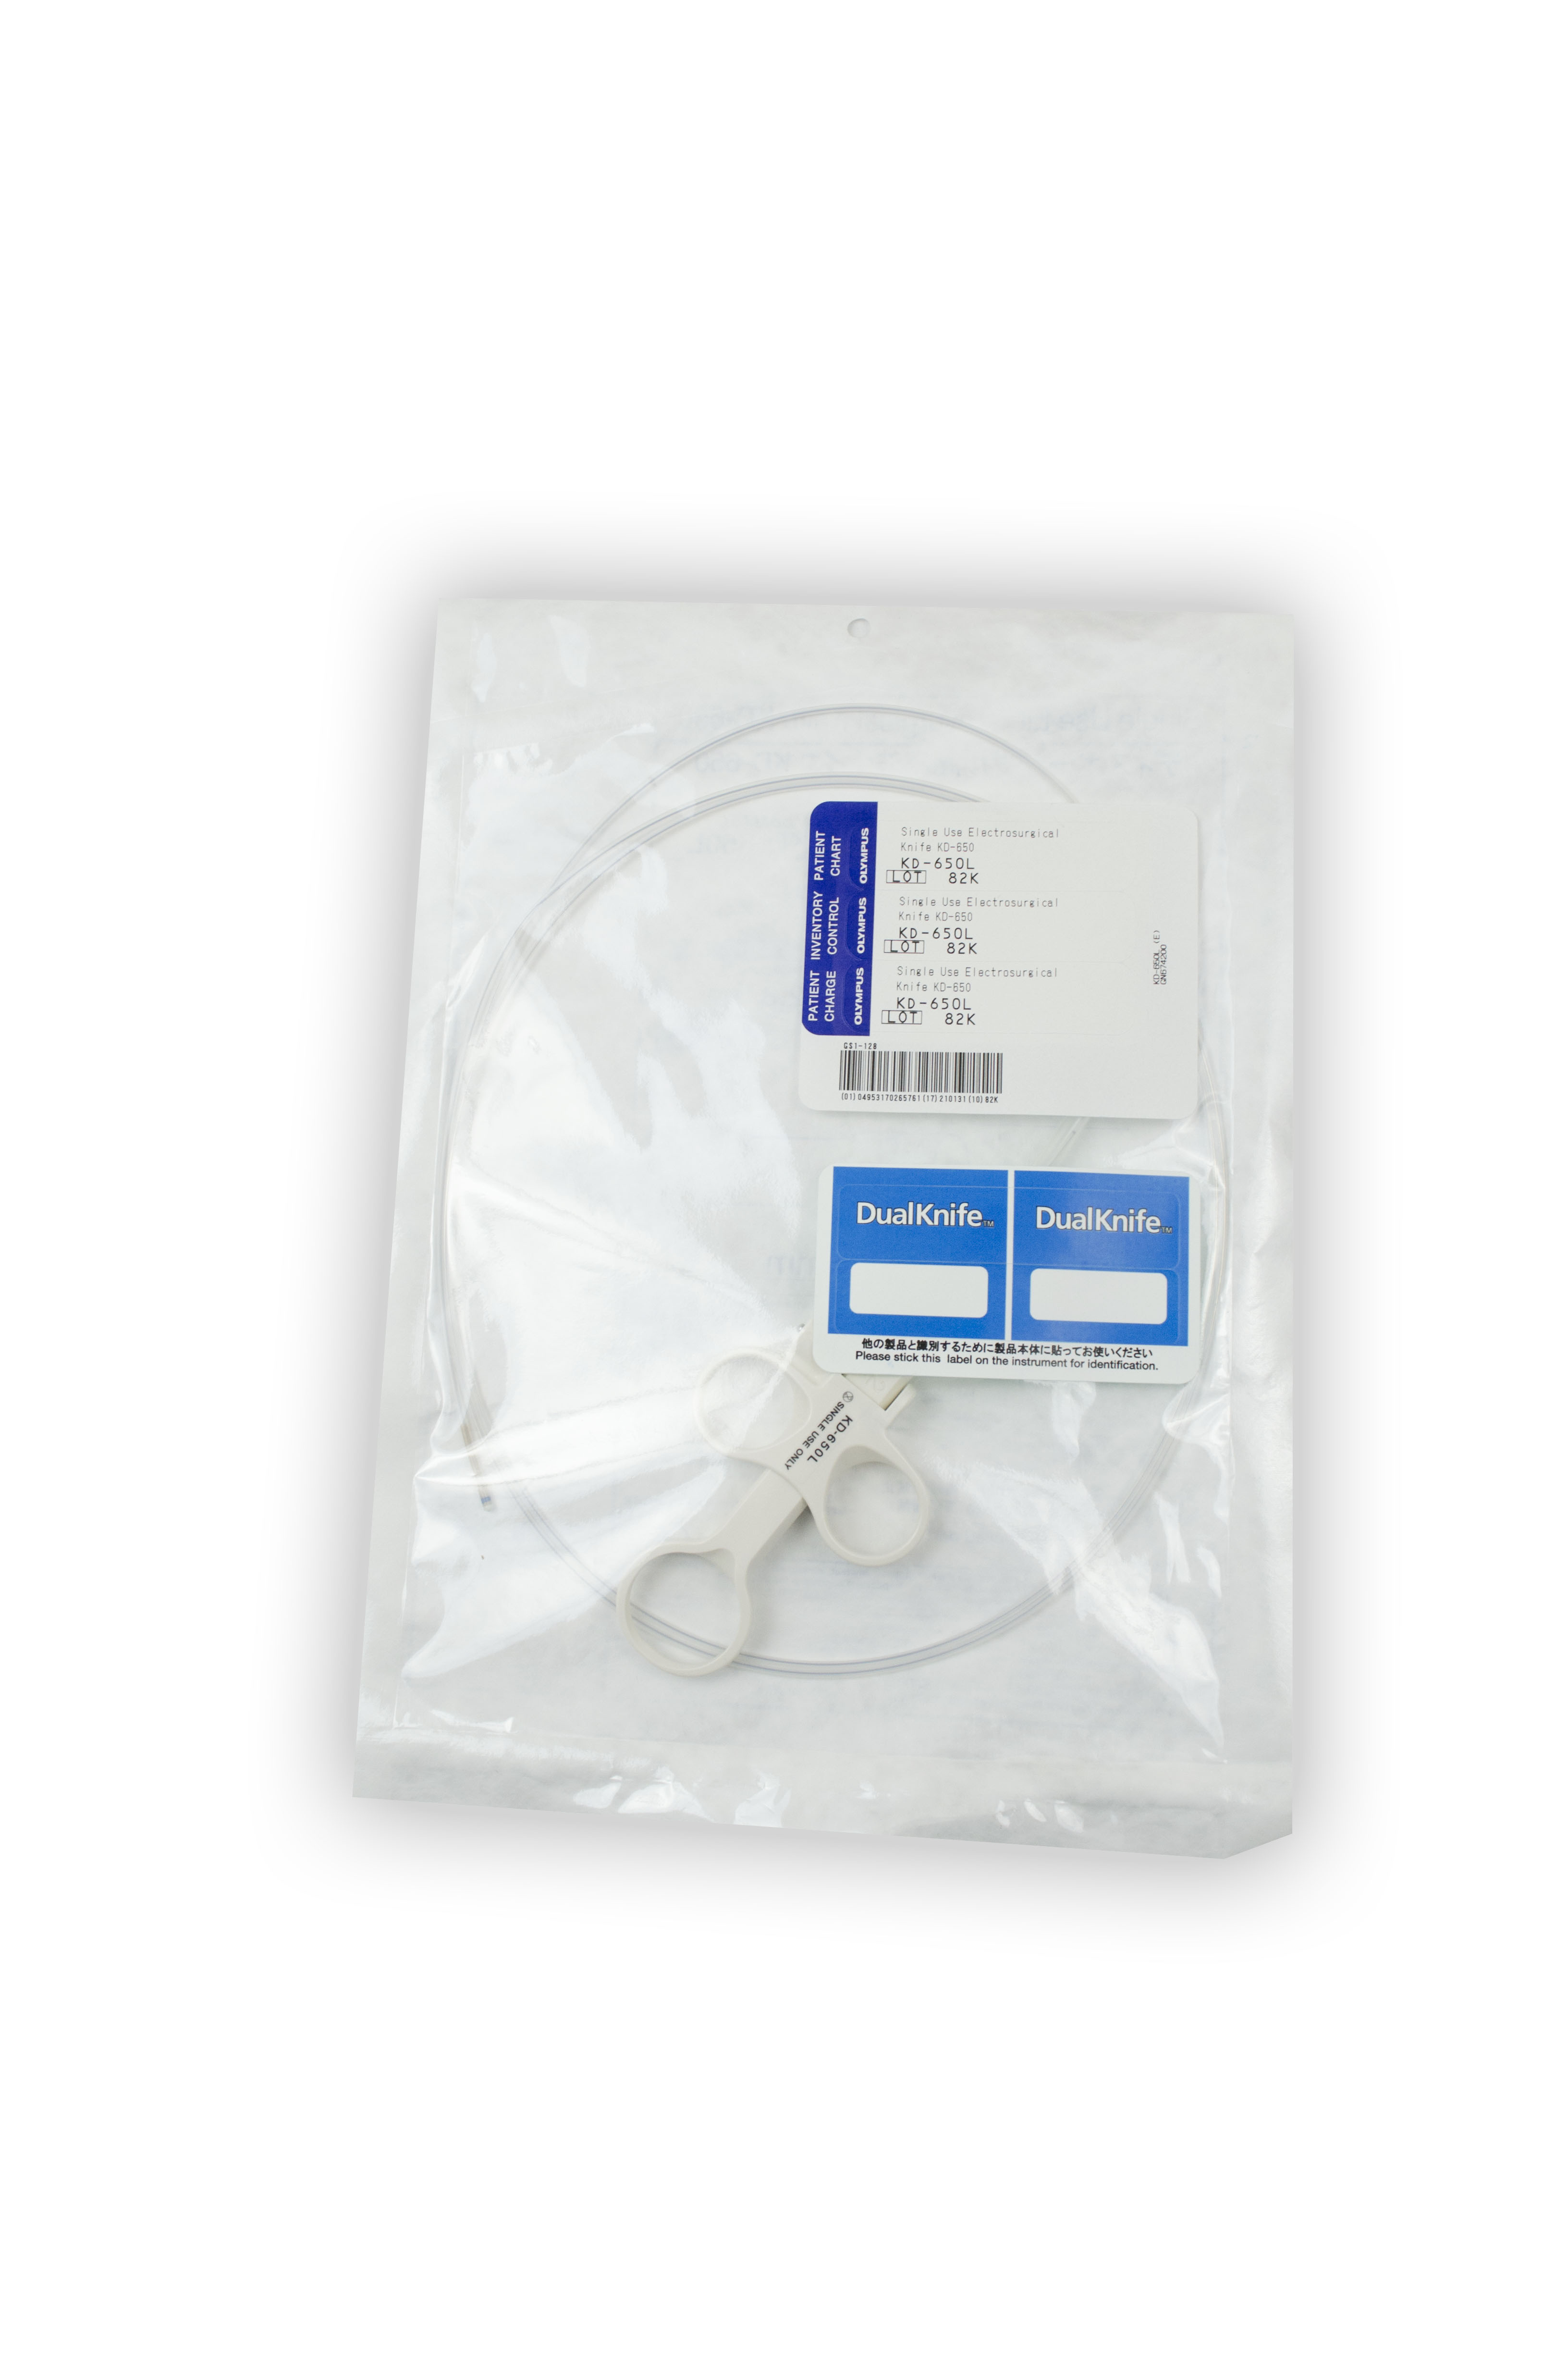 [Out-of-Date] Olympus Disposable Sphincterotome (Triangle Tip) - KD-640L